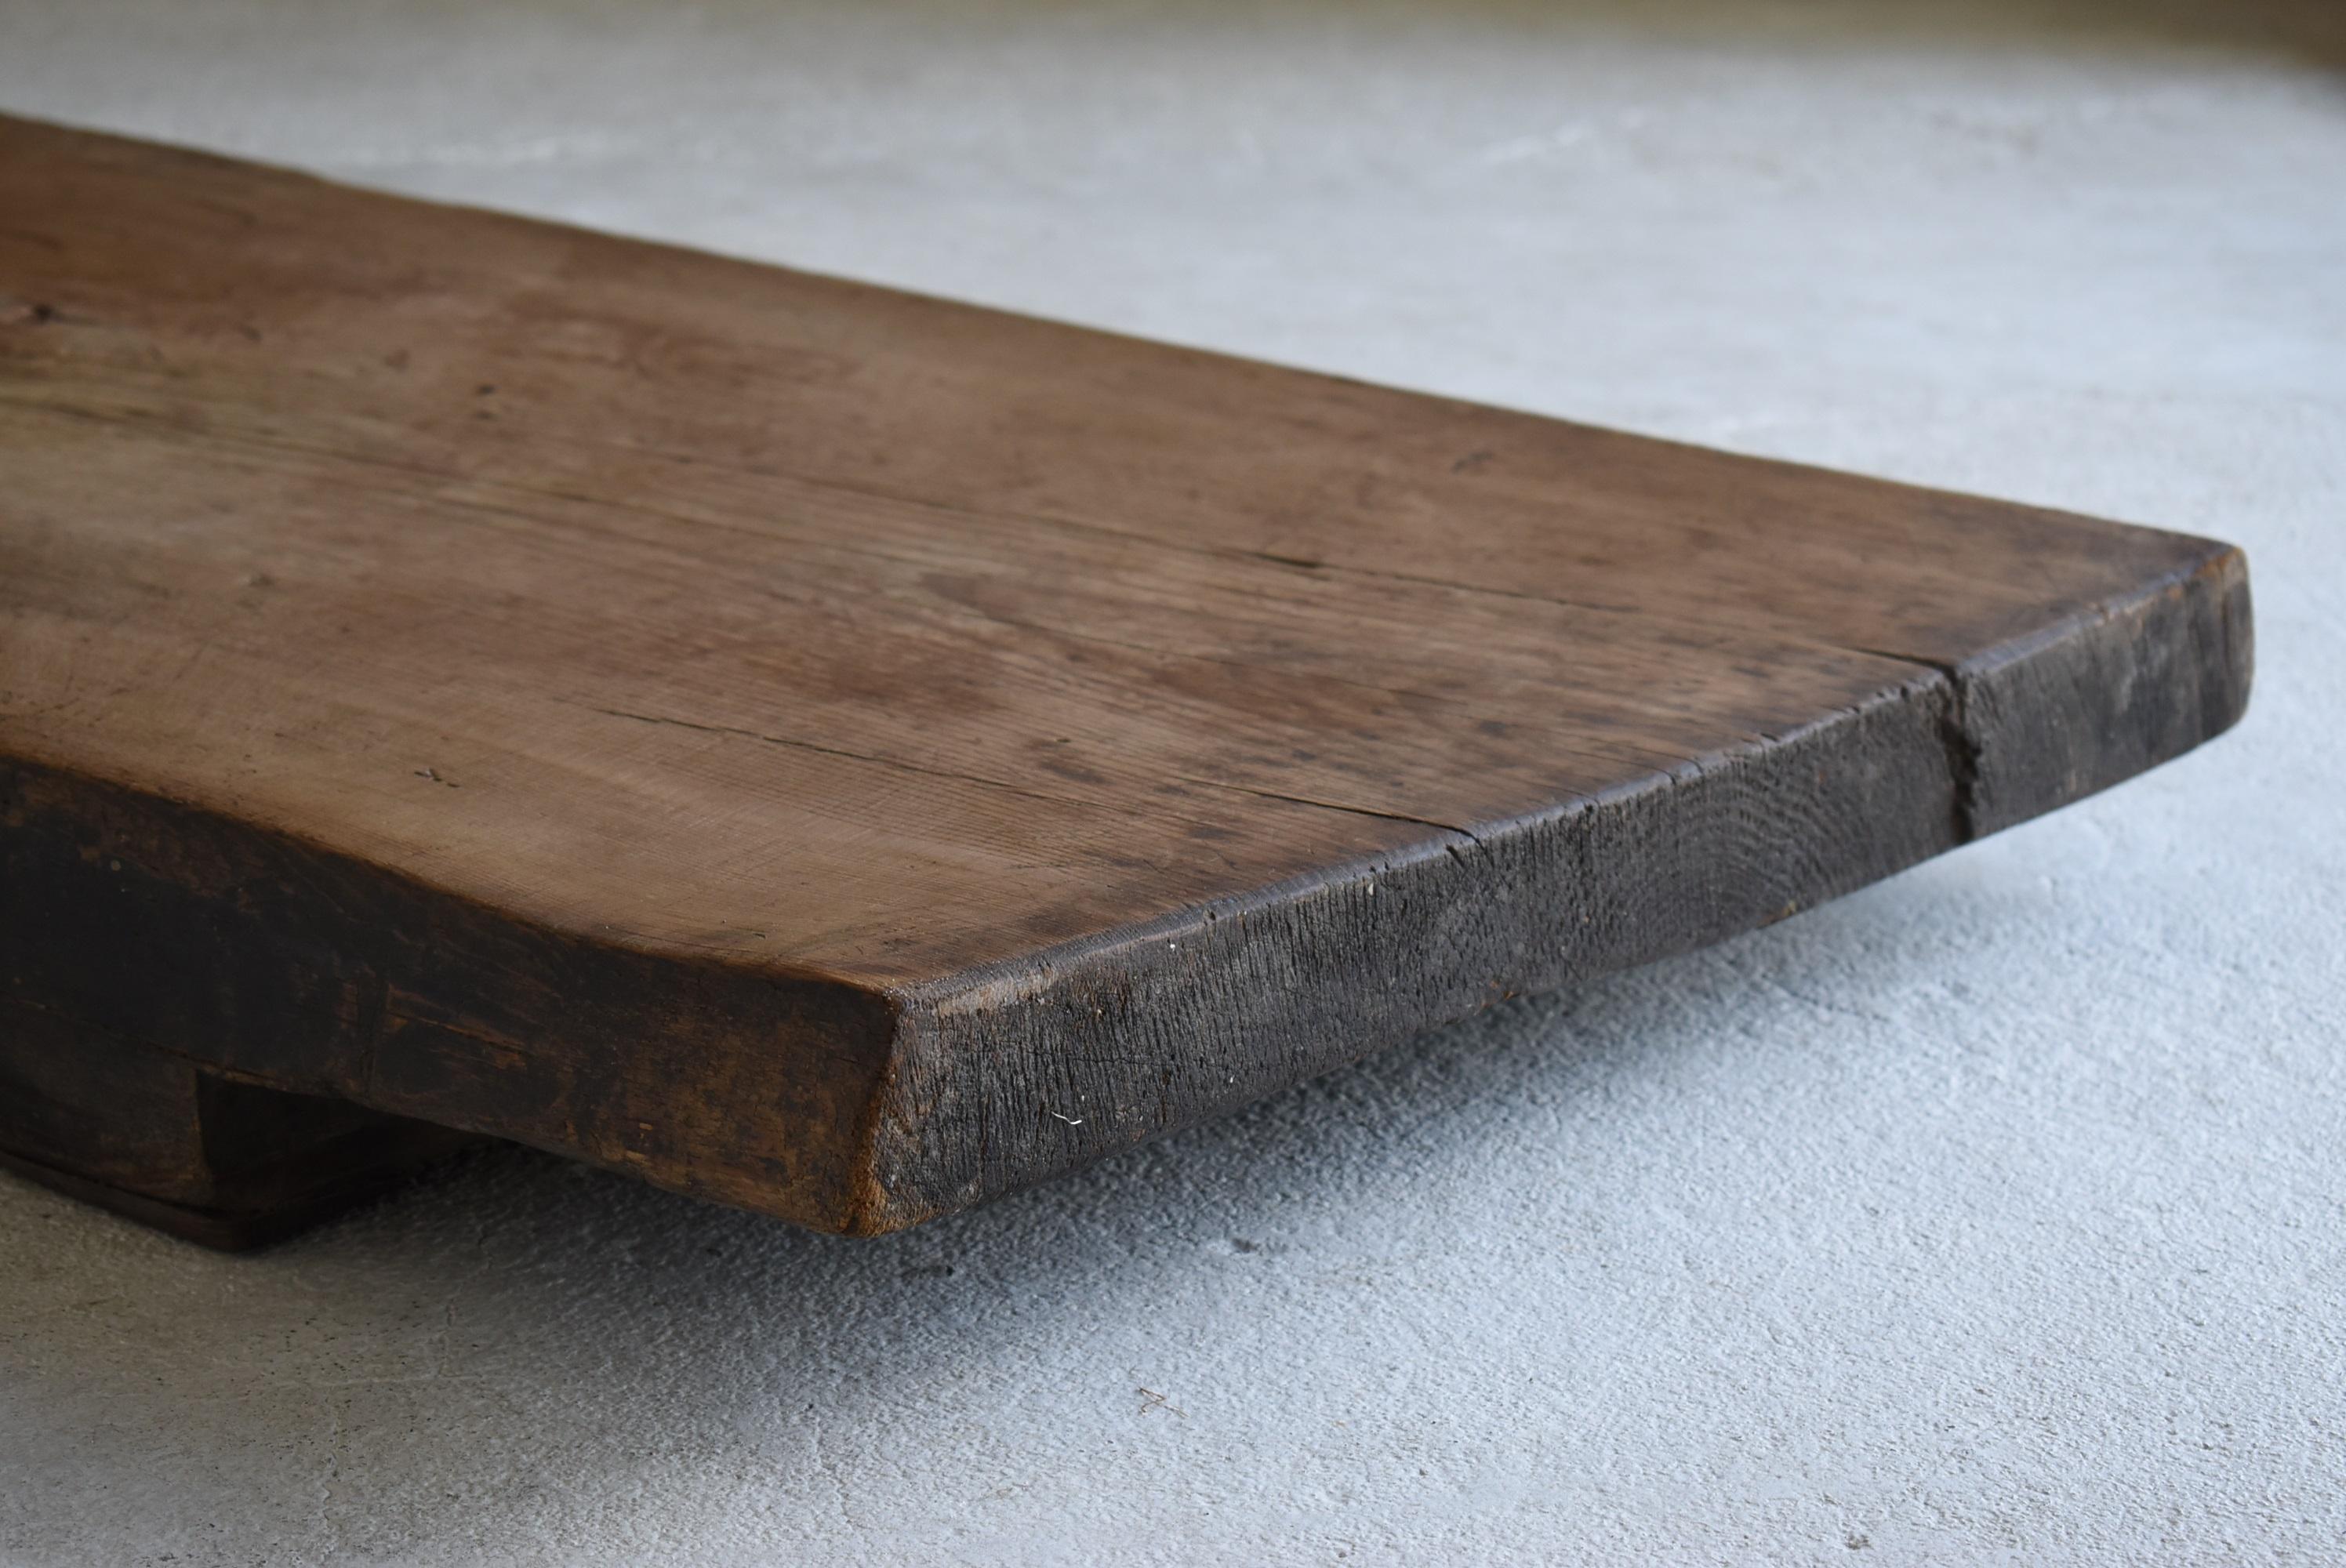 Japanese Large Wooden Board 1860s-1900s/Antique Low Table Sofa Table  1